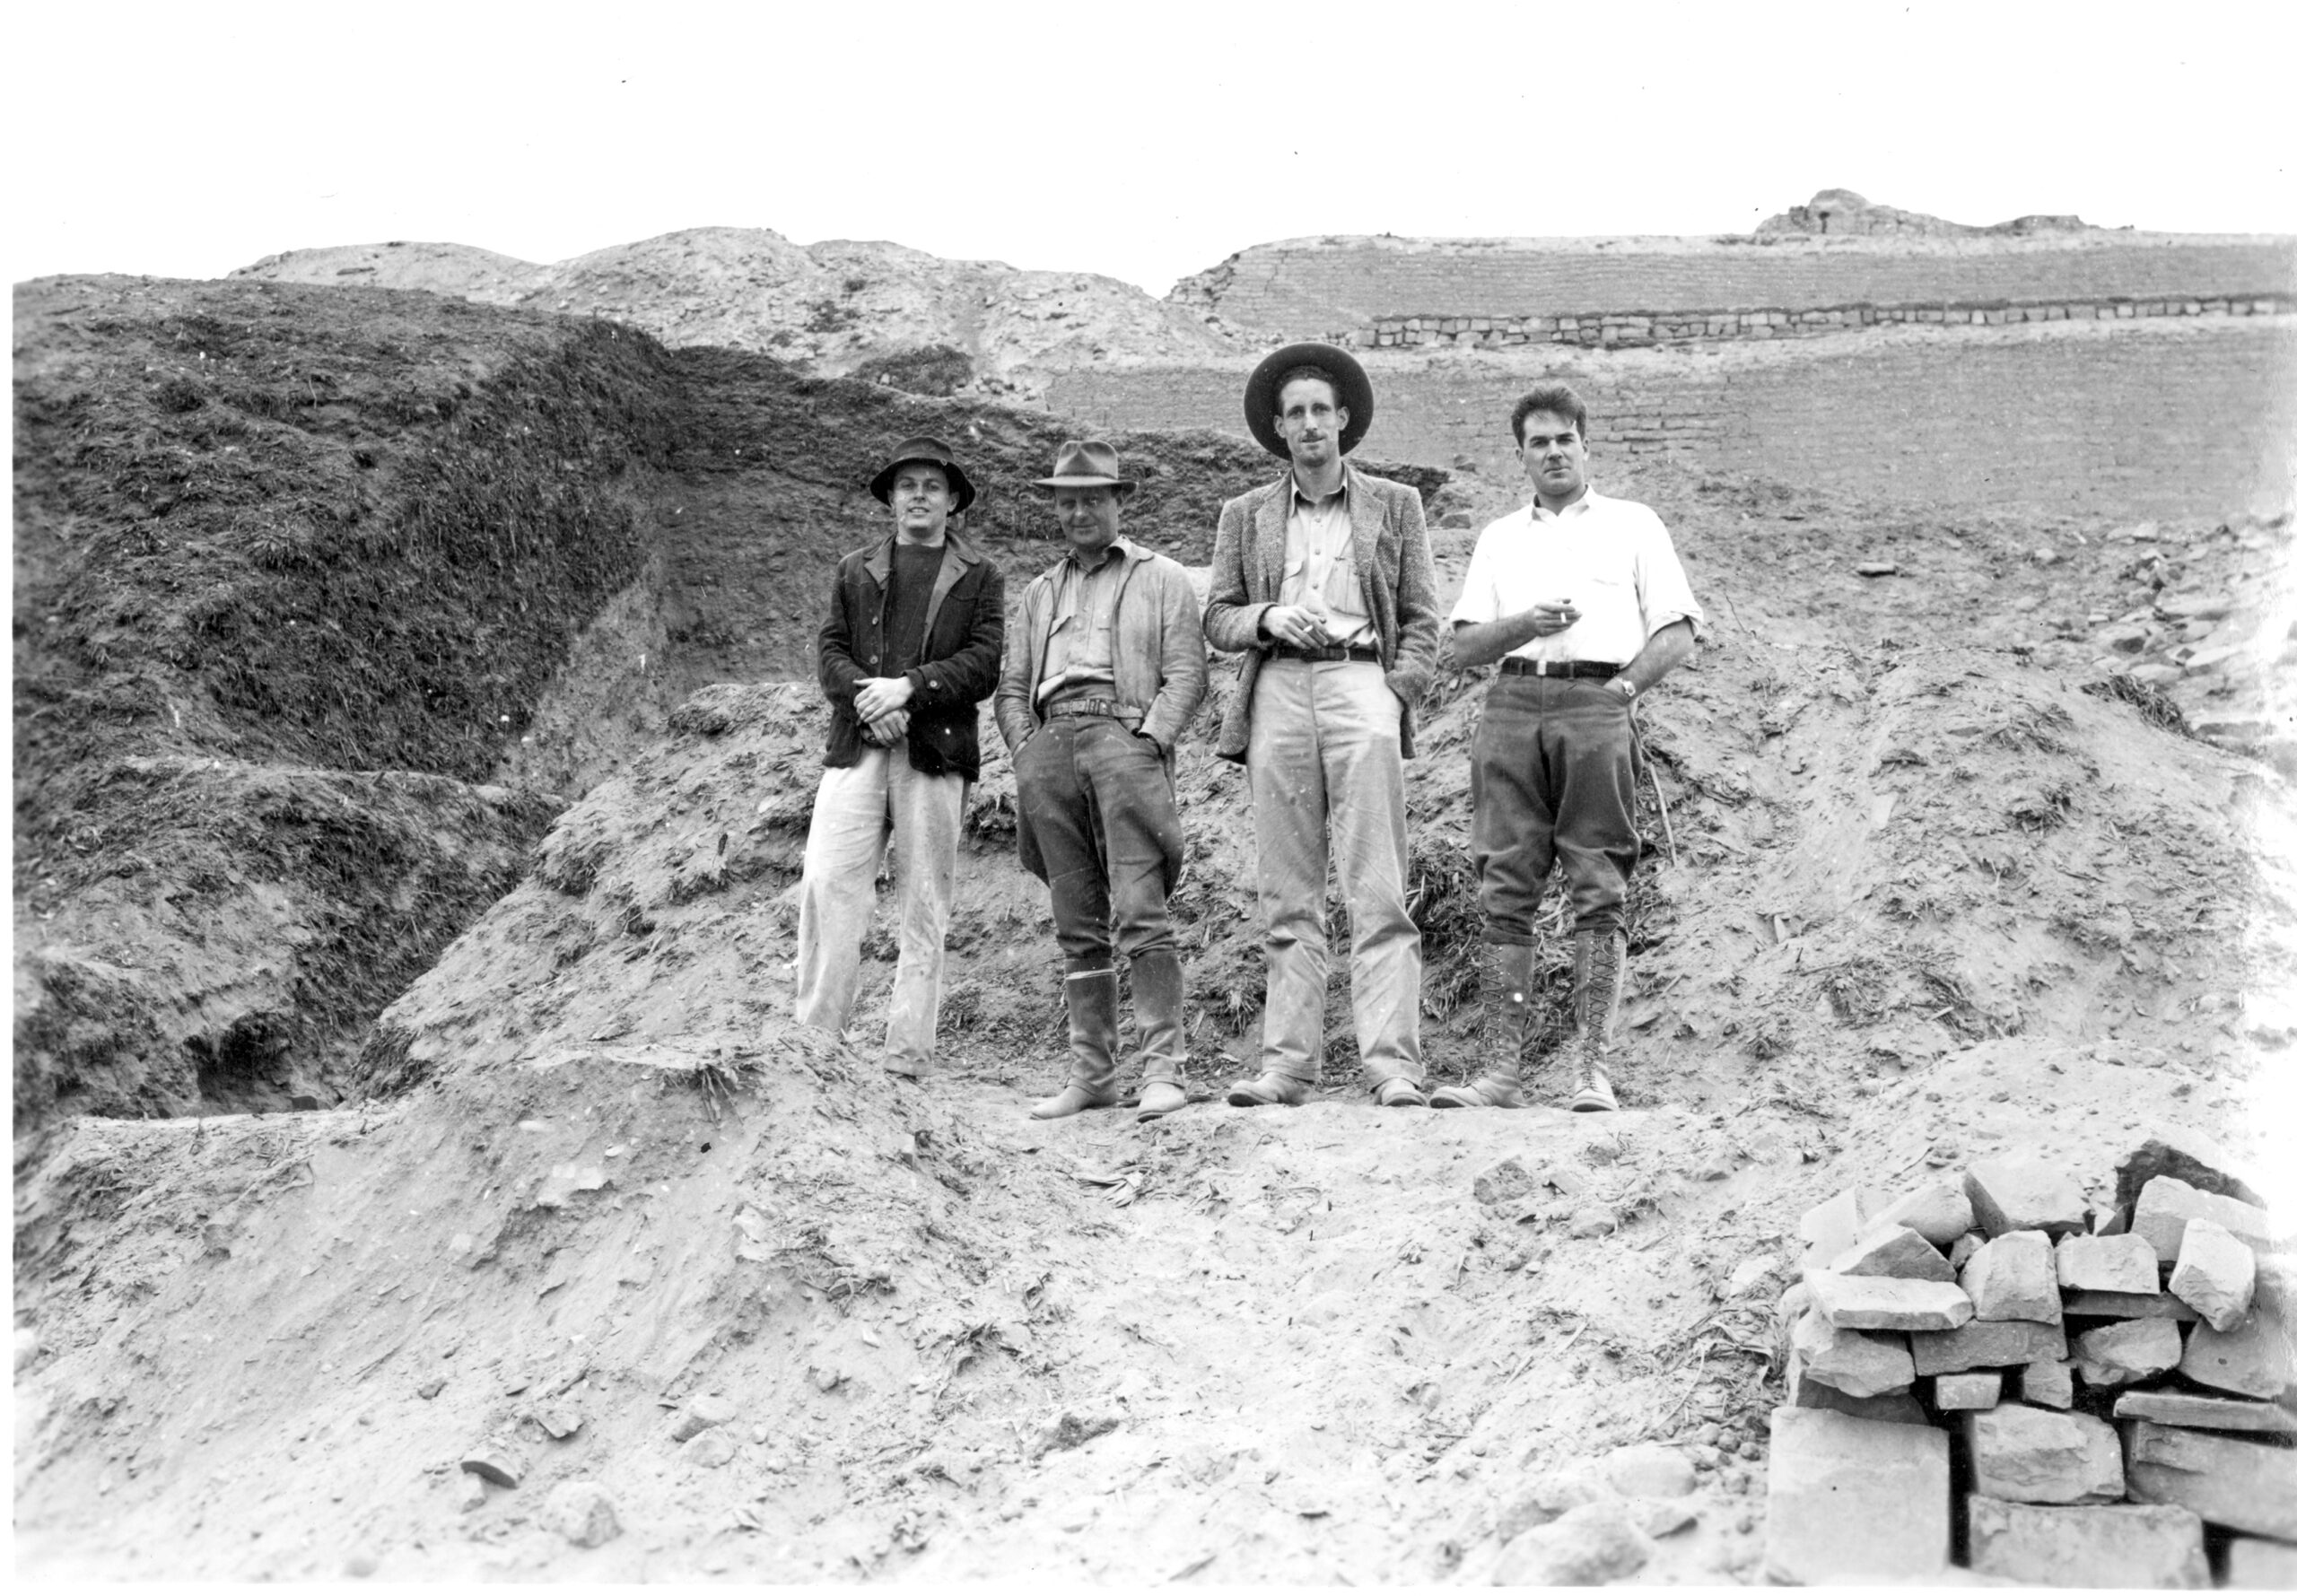 image of 4 men, left to right: Willey, William Duncan Strong, John Corbett, and Marshall (Bud) Newmann at Pachacamac (1941)